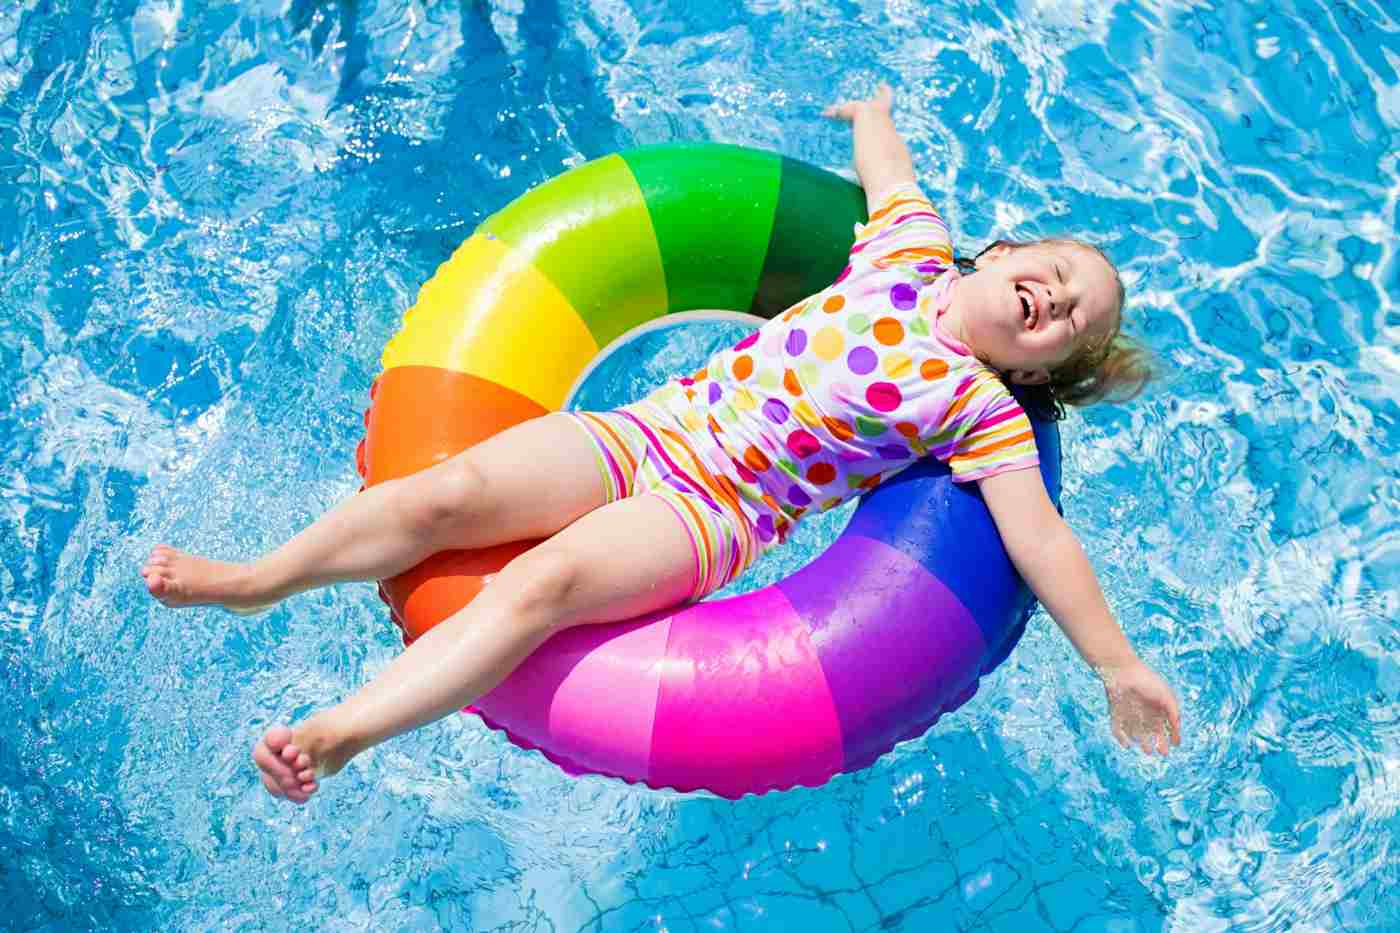 Your pool party in summer is not really fun for kids